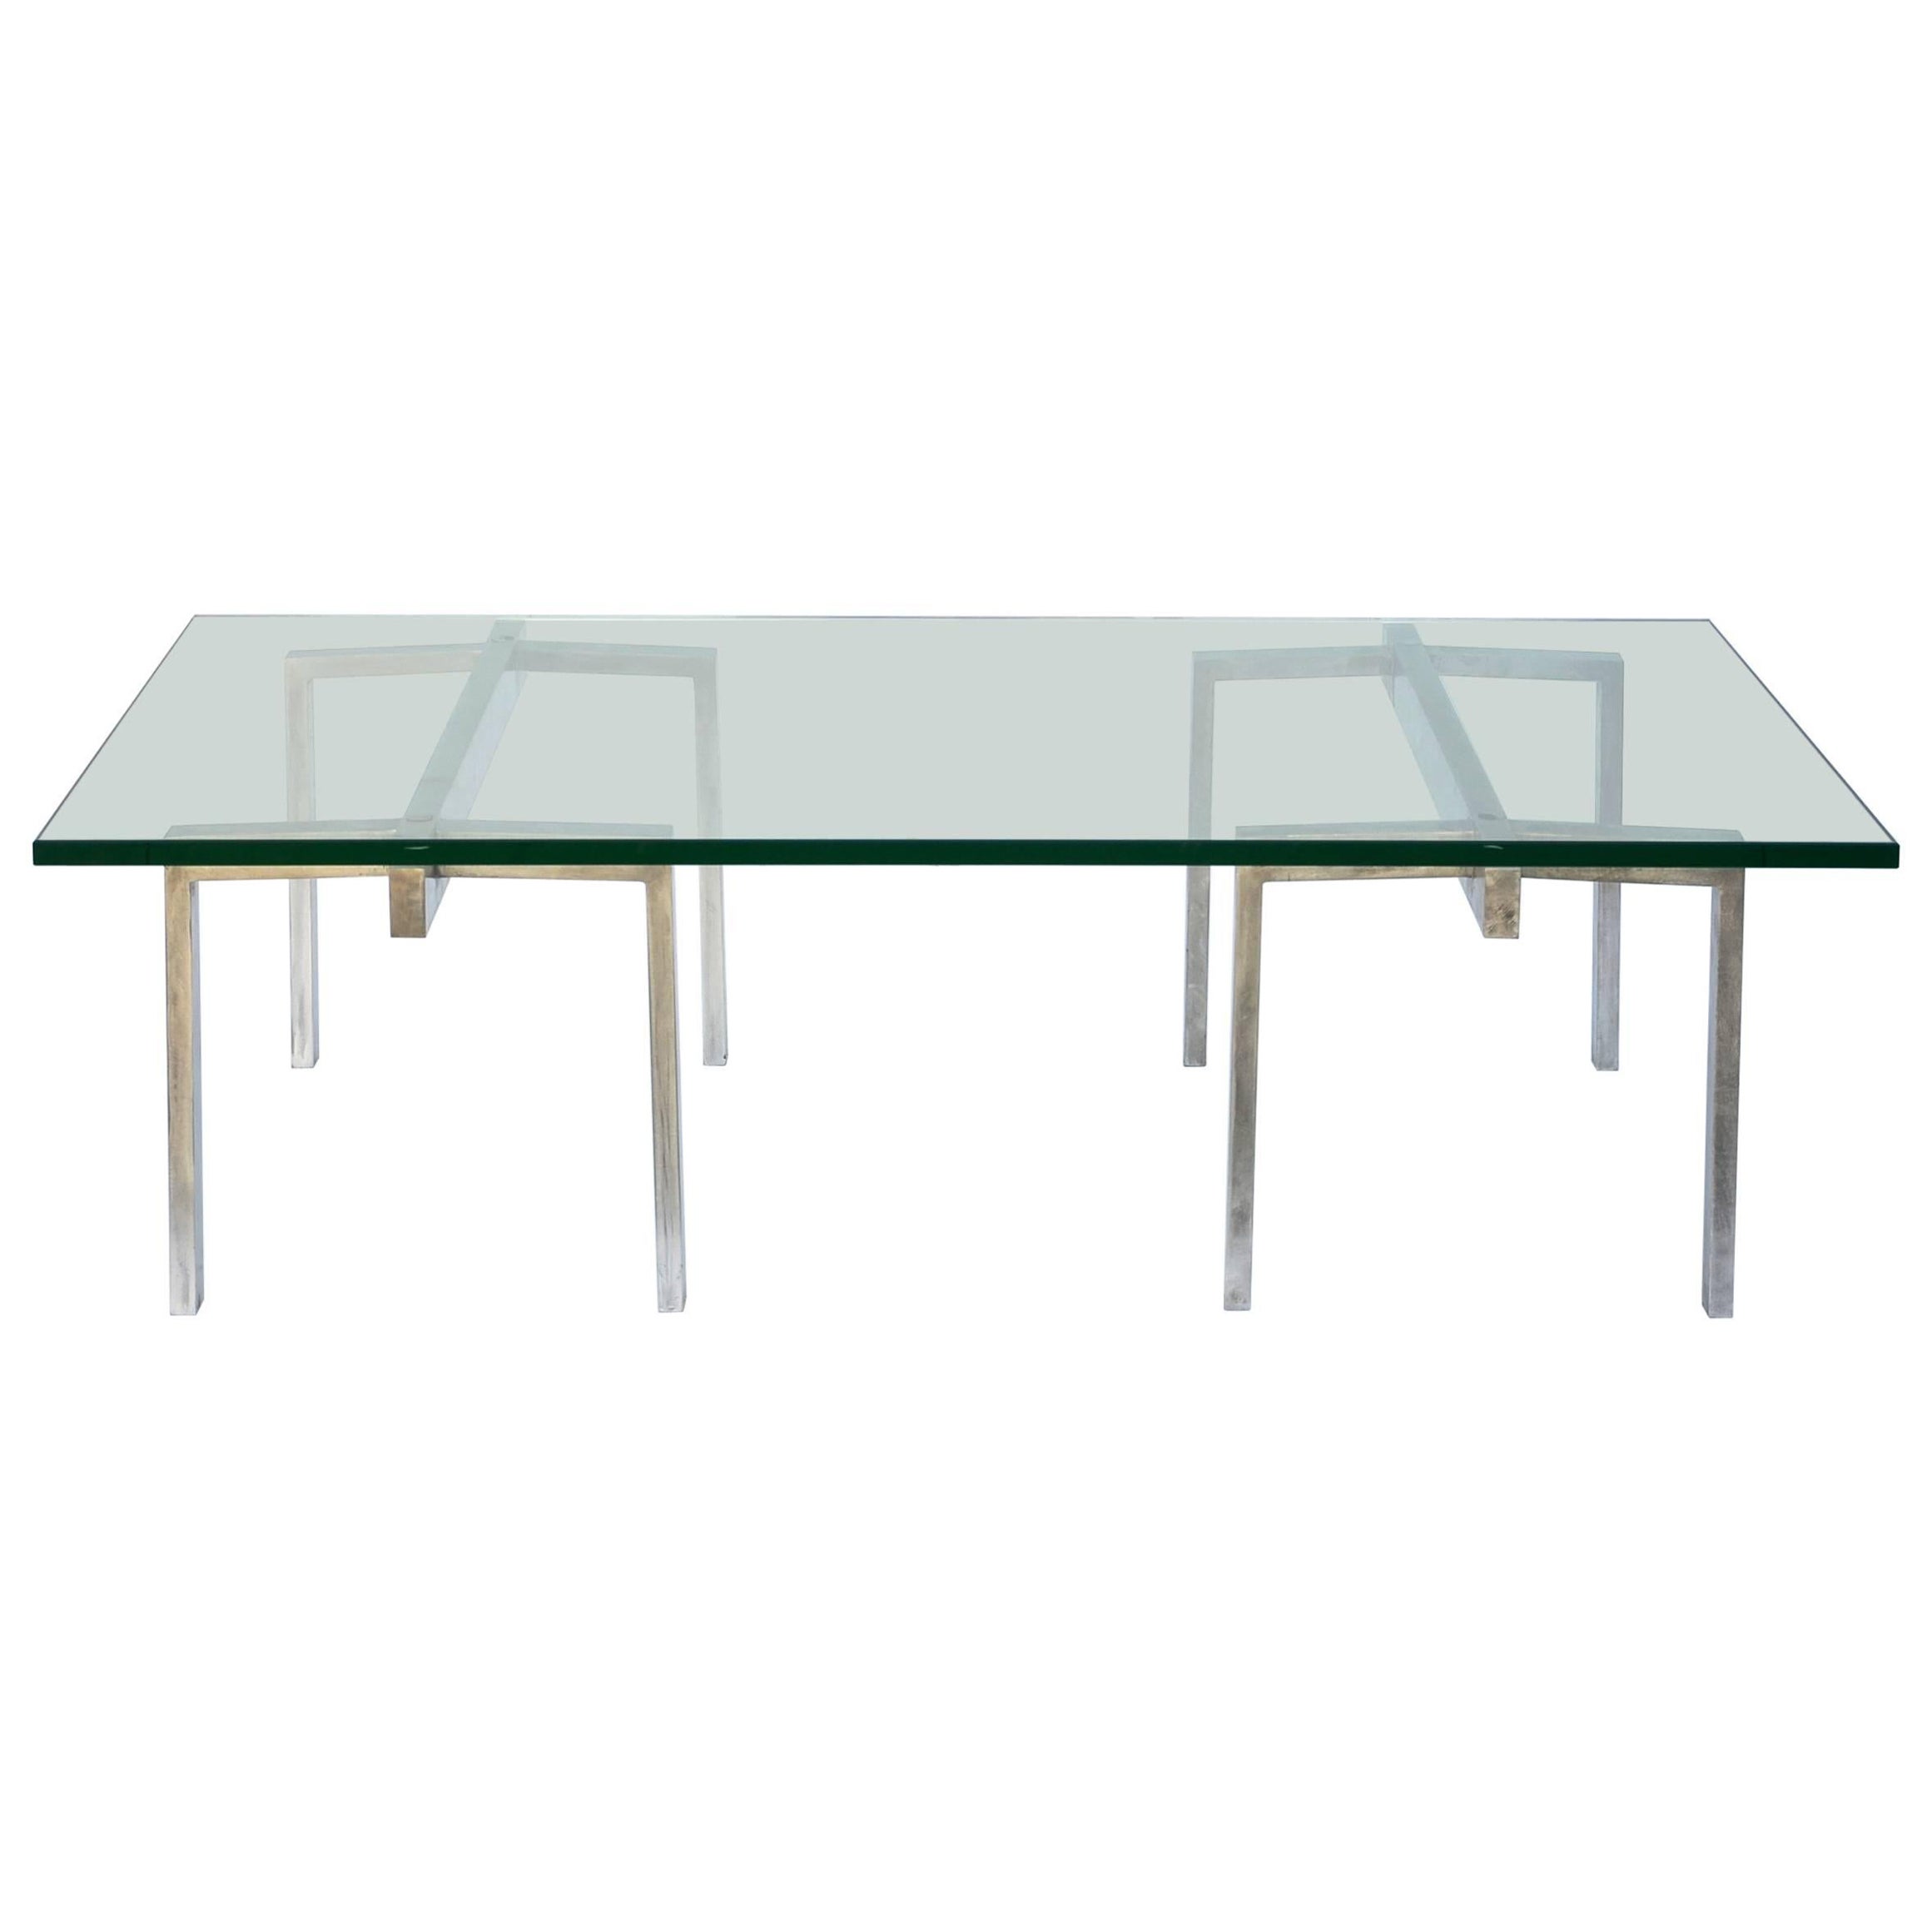 The 'Treteaux' Coffee Table by Design Frères For Sale